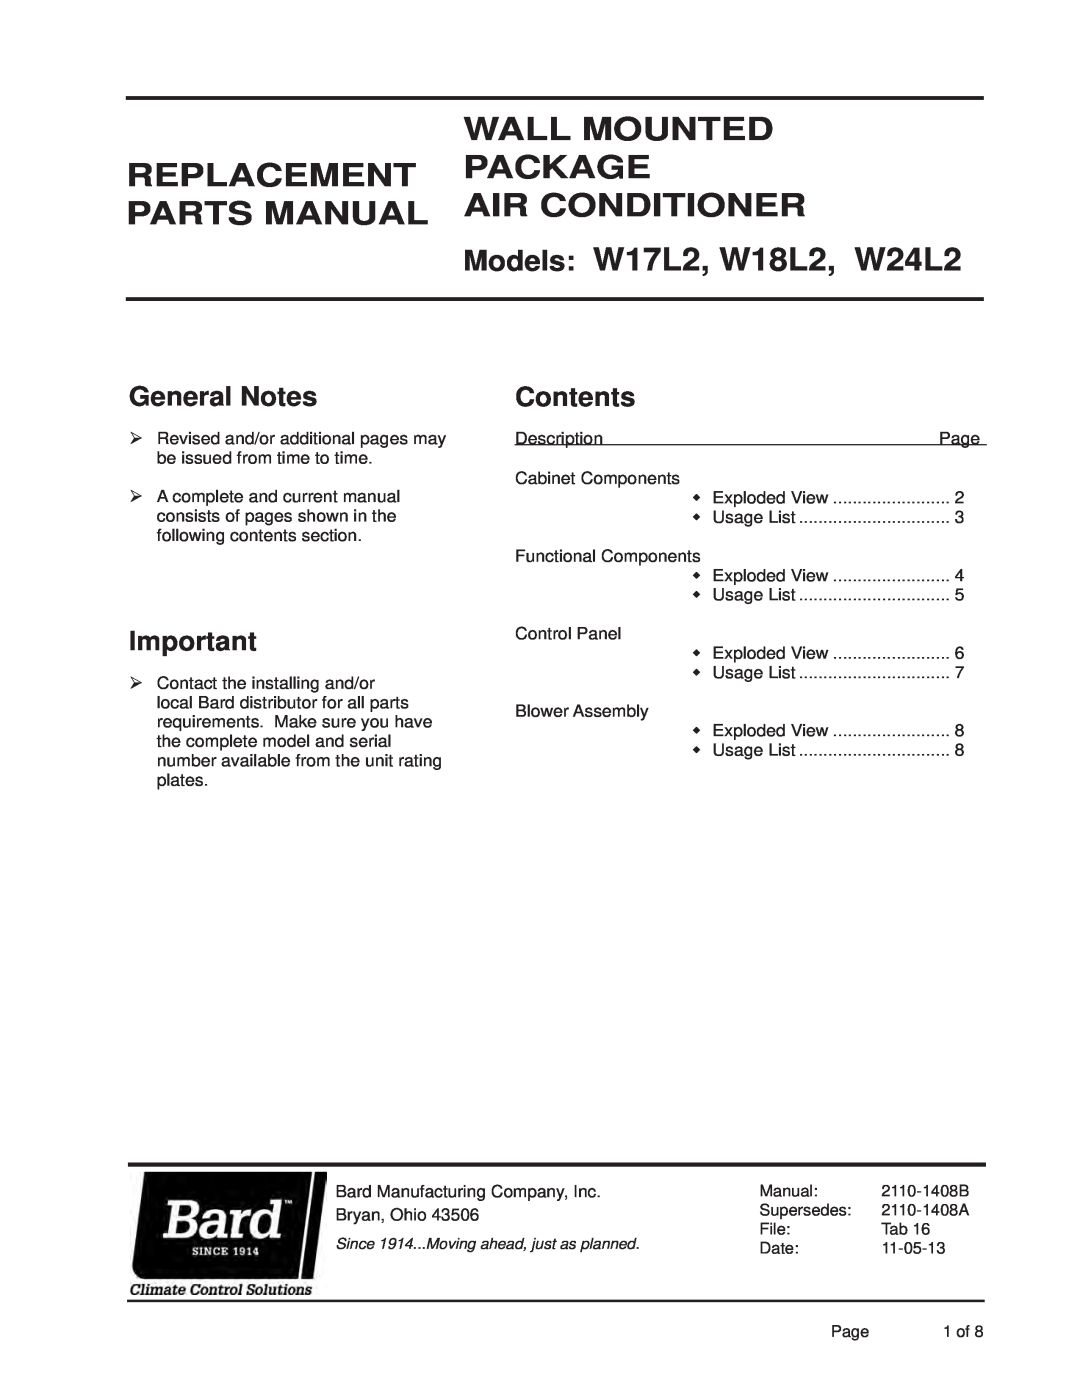 Bard W18L2, W24L2, W17L2 manual Wall Mounted Replacement Package, General Notes, Contents 